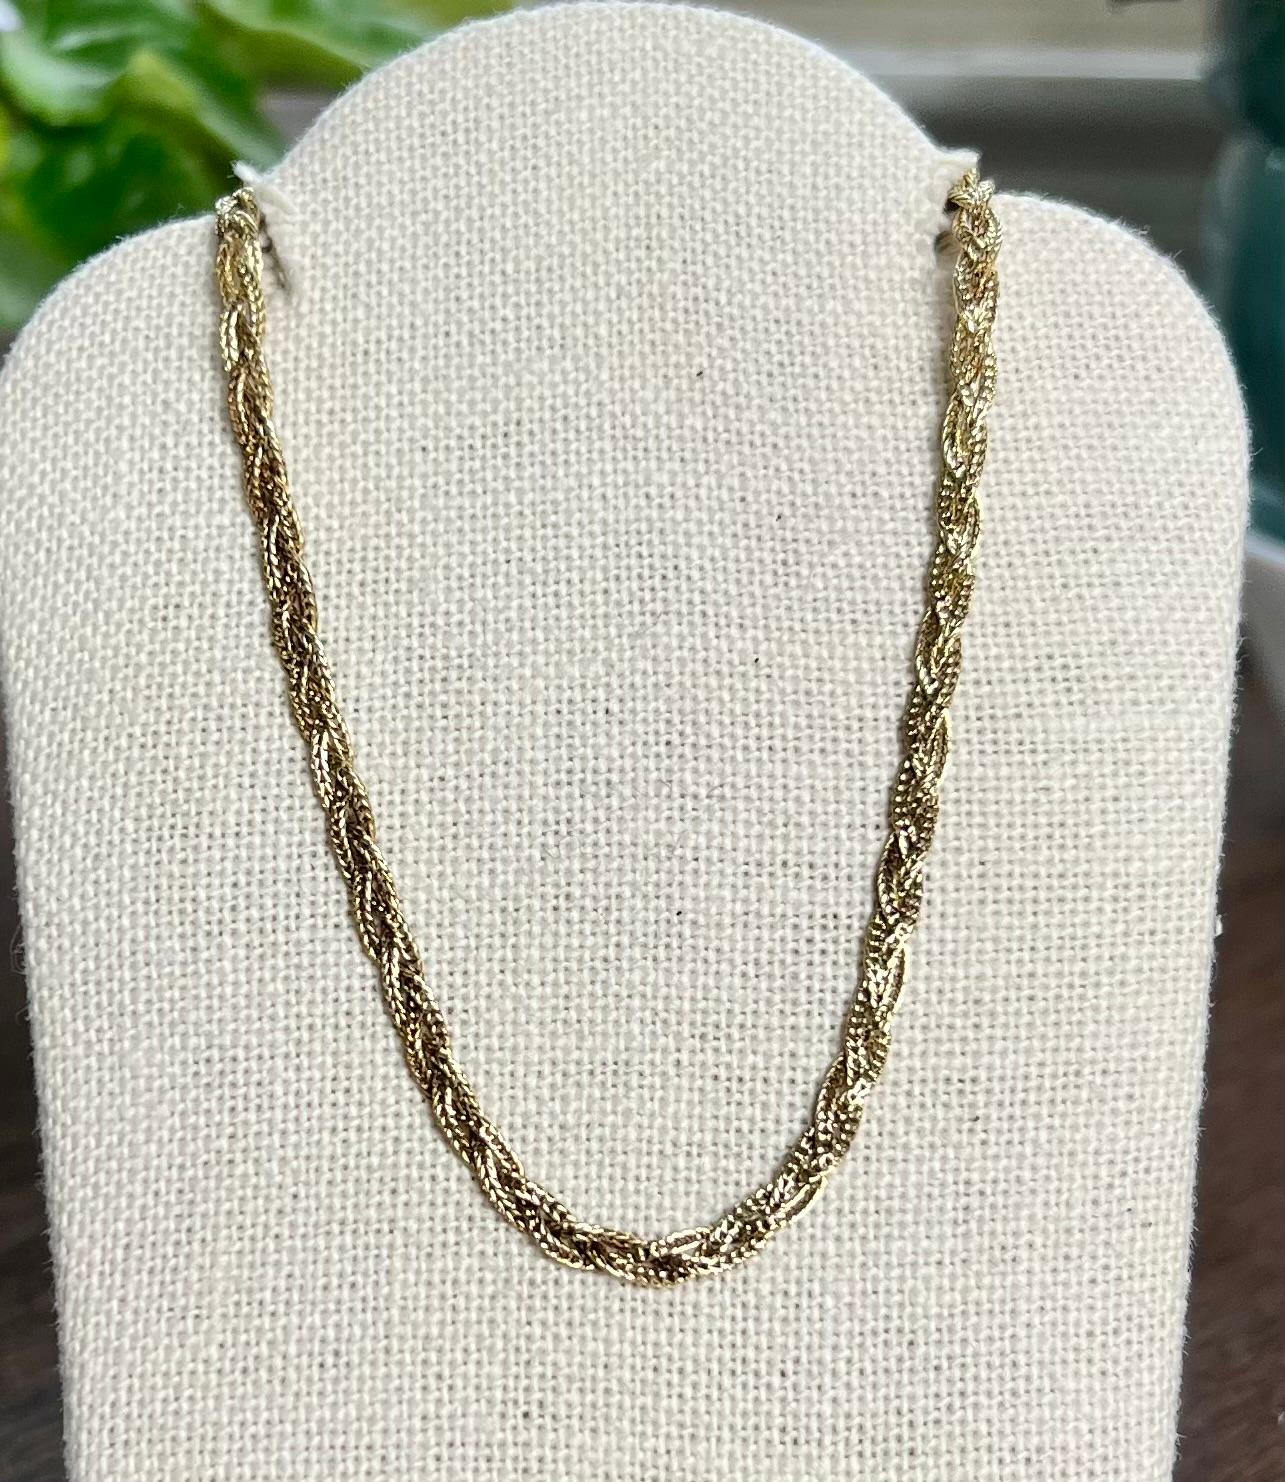 One 14 karat braided quadra-wheat link chain measuring 3.25mm wide, 18 inches long, and is complete with a square tube clasp.  